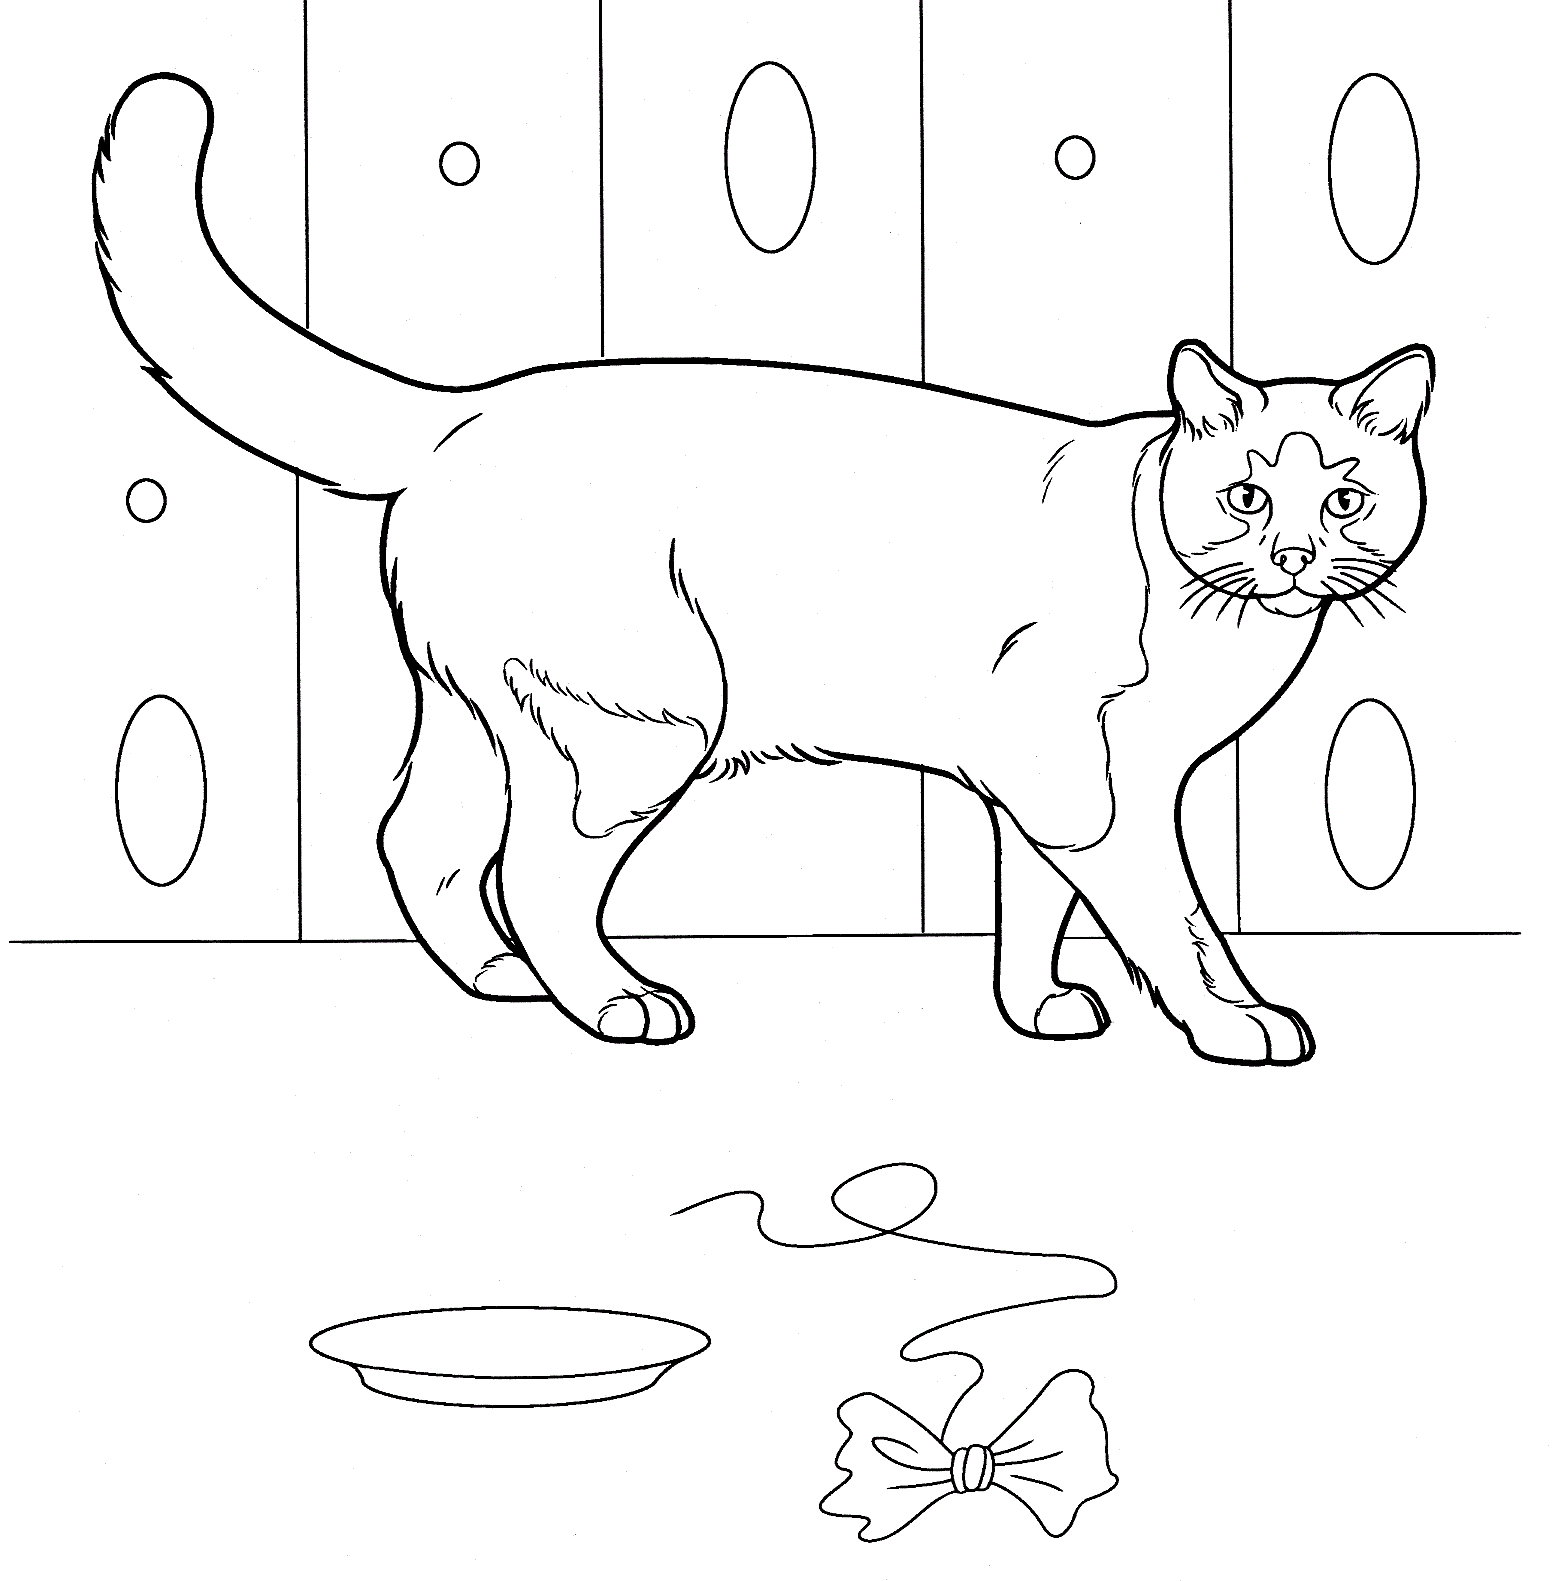 Kitty at Home Coloring Page